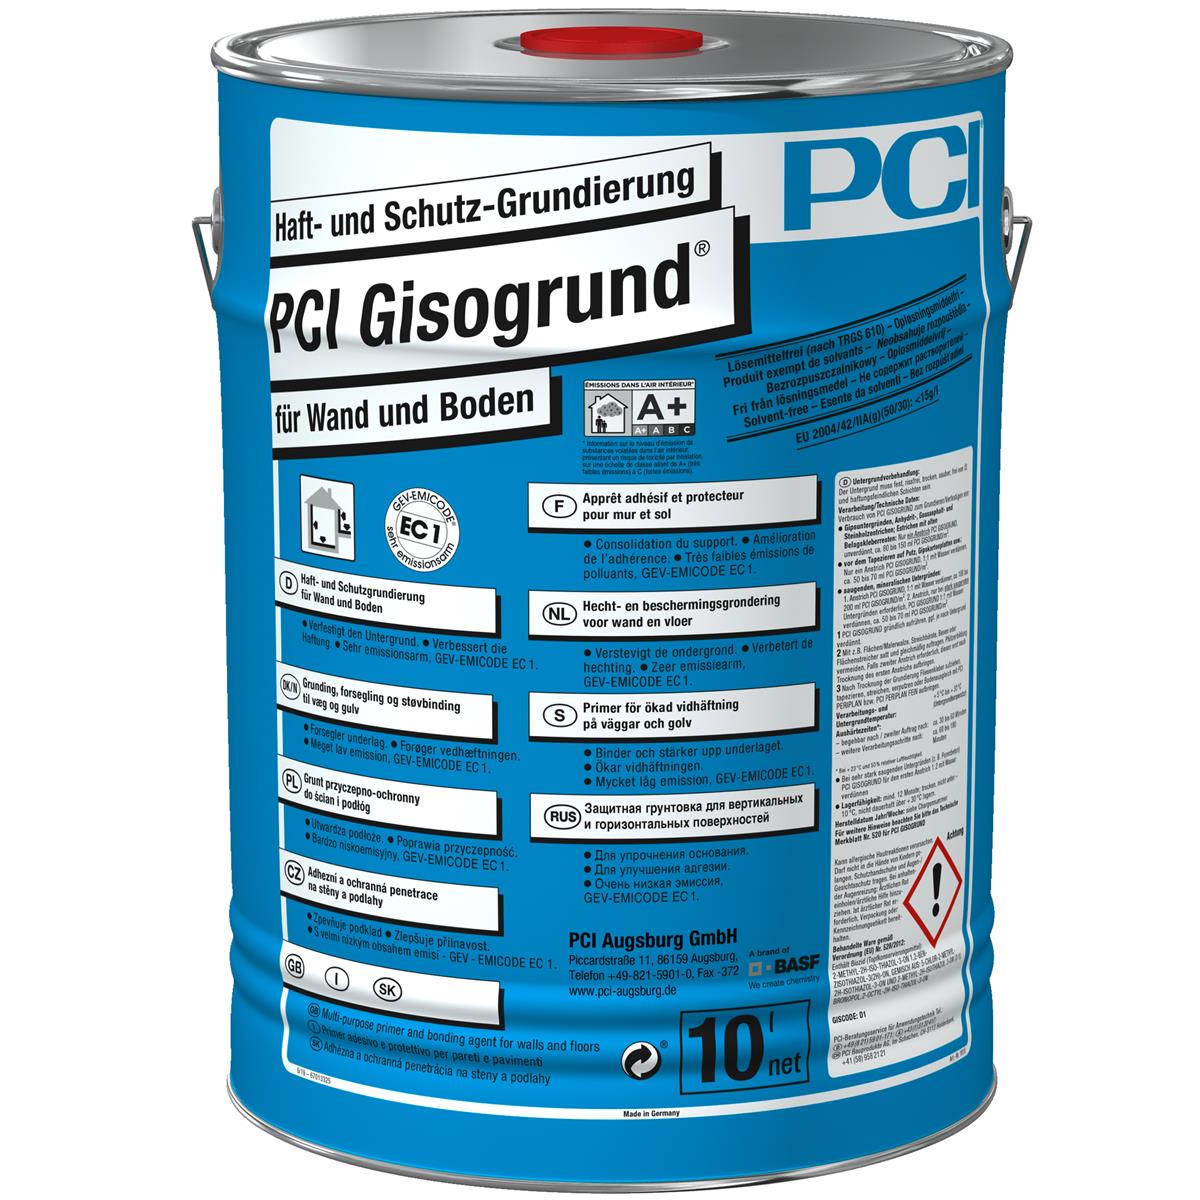 PCI Gisogrund adhesive and protective primer blue 200 liters